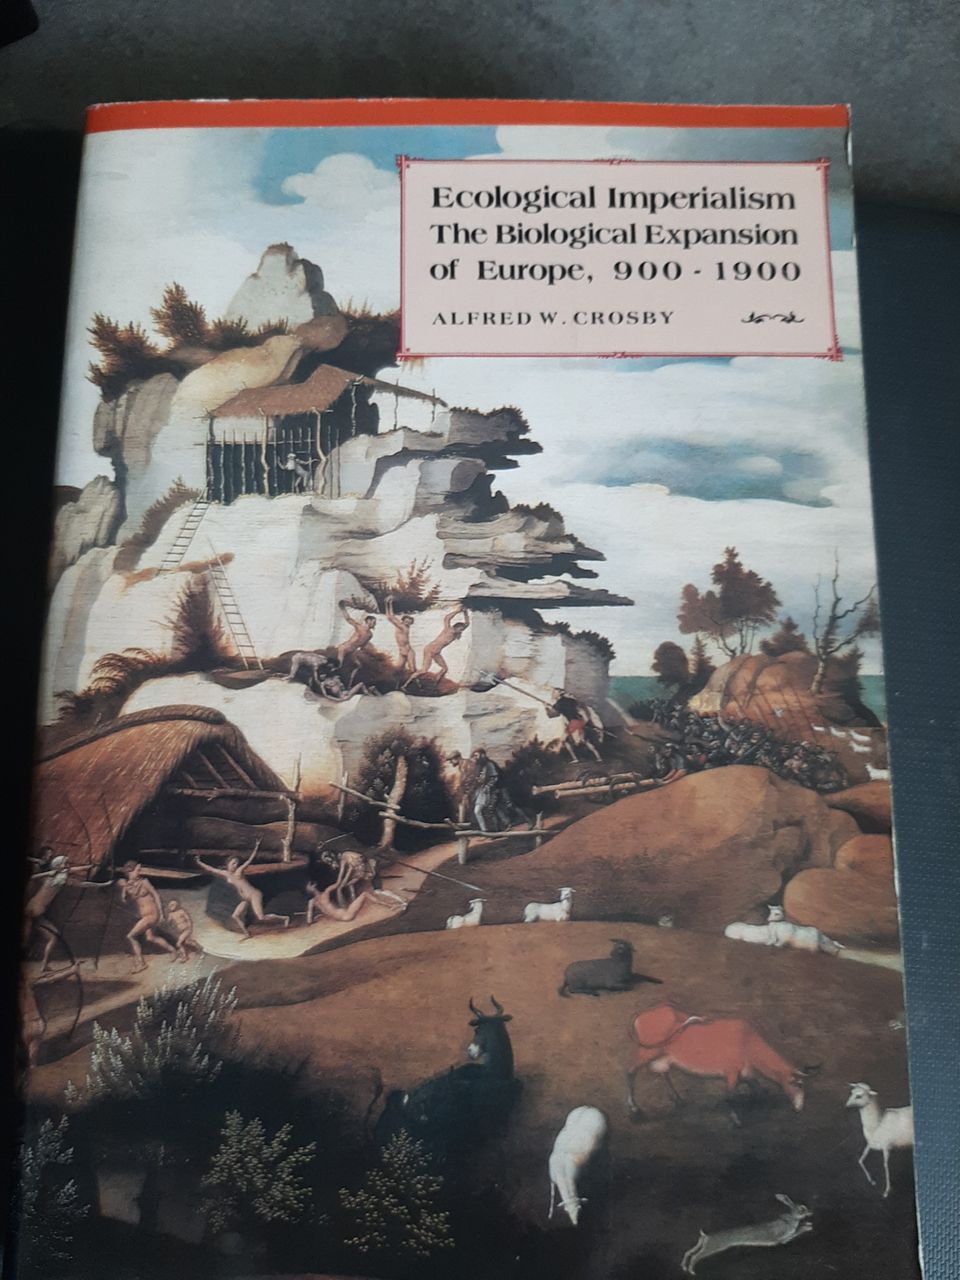 Ecologocal imperialism The biological Expansion of Europe, 900-1900